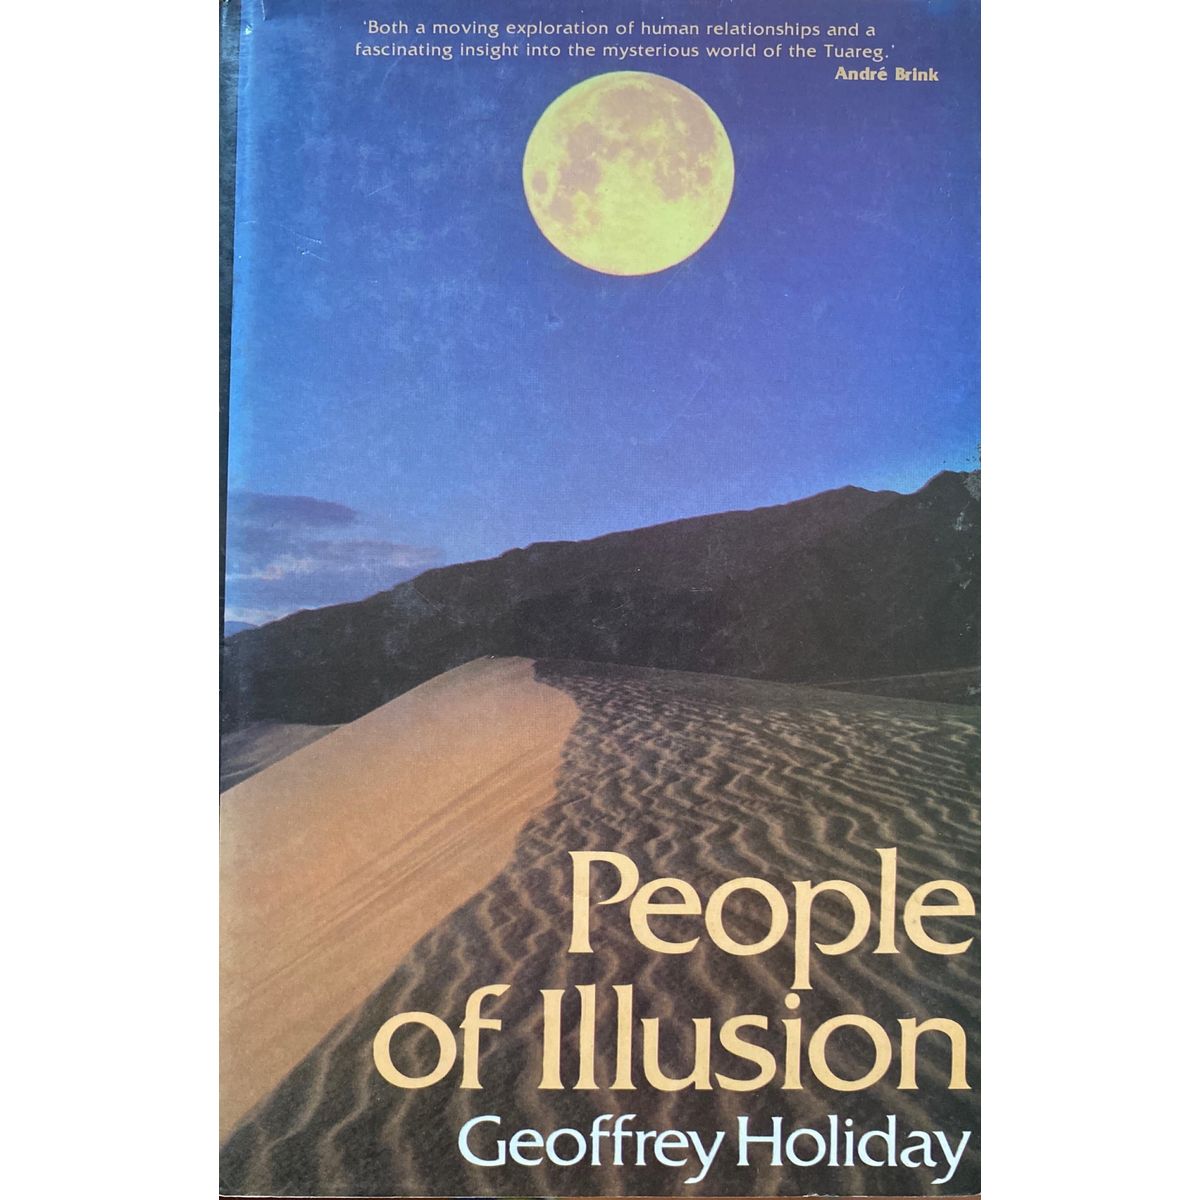 ISBN: 9780712608534 / 0712608532 - People of Illusion by Geoffrey Holiday [1985]